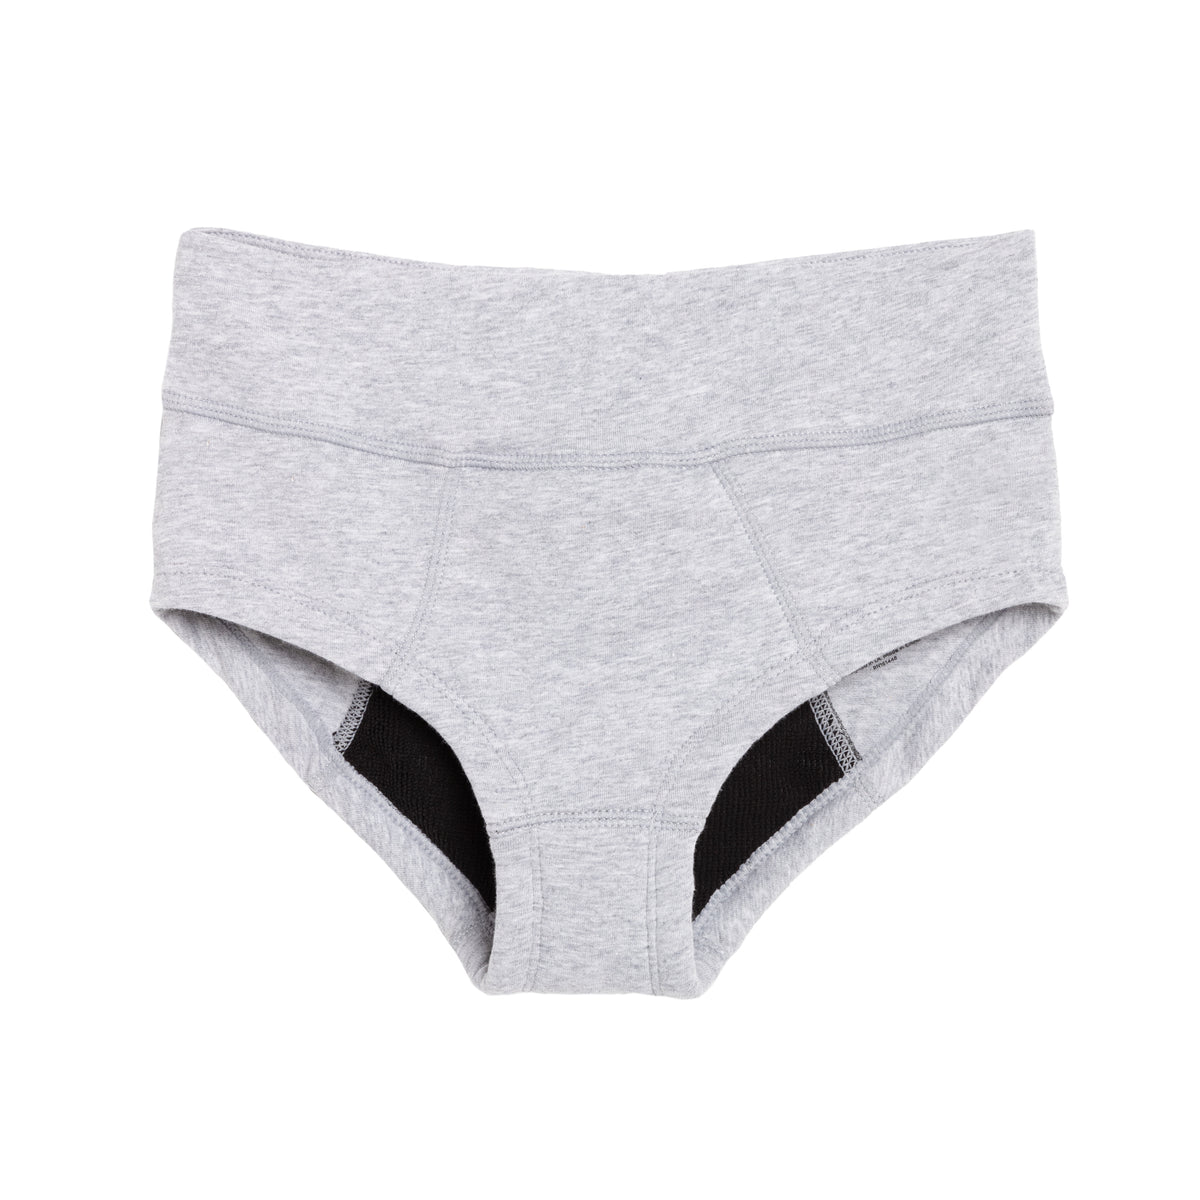 Women's Panties for sale in South Dennis, New Jersey